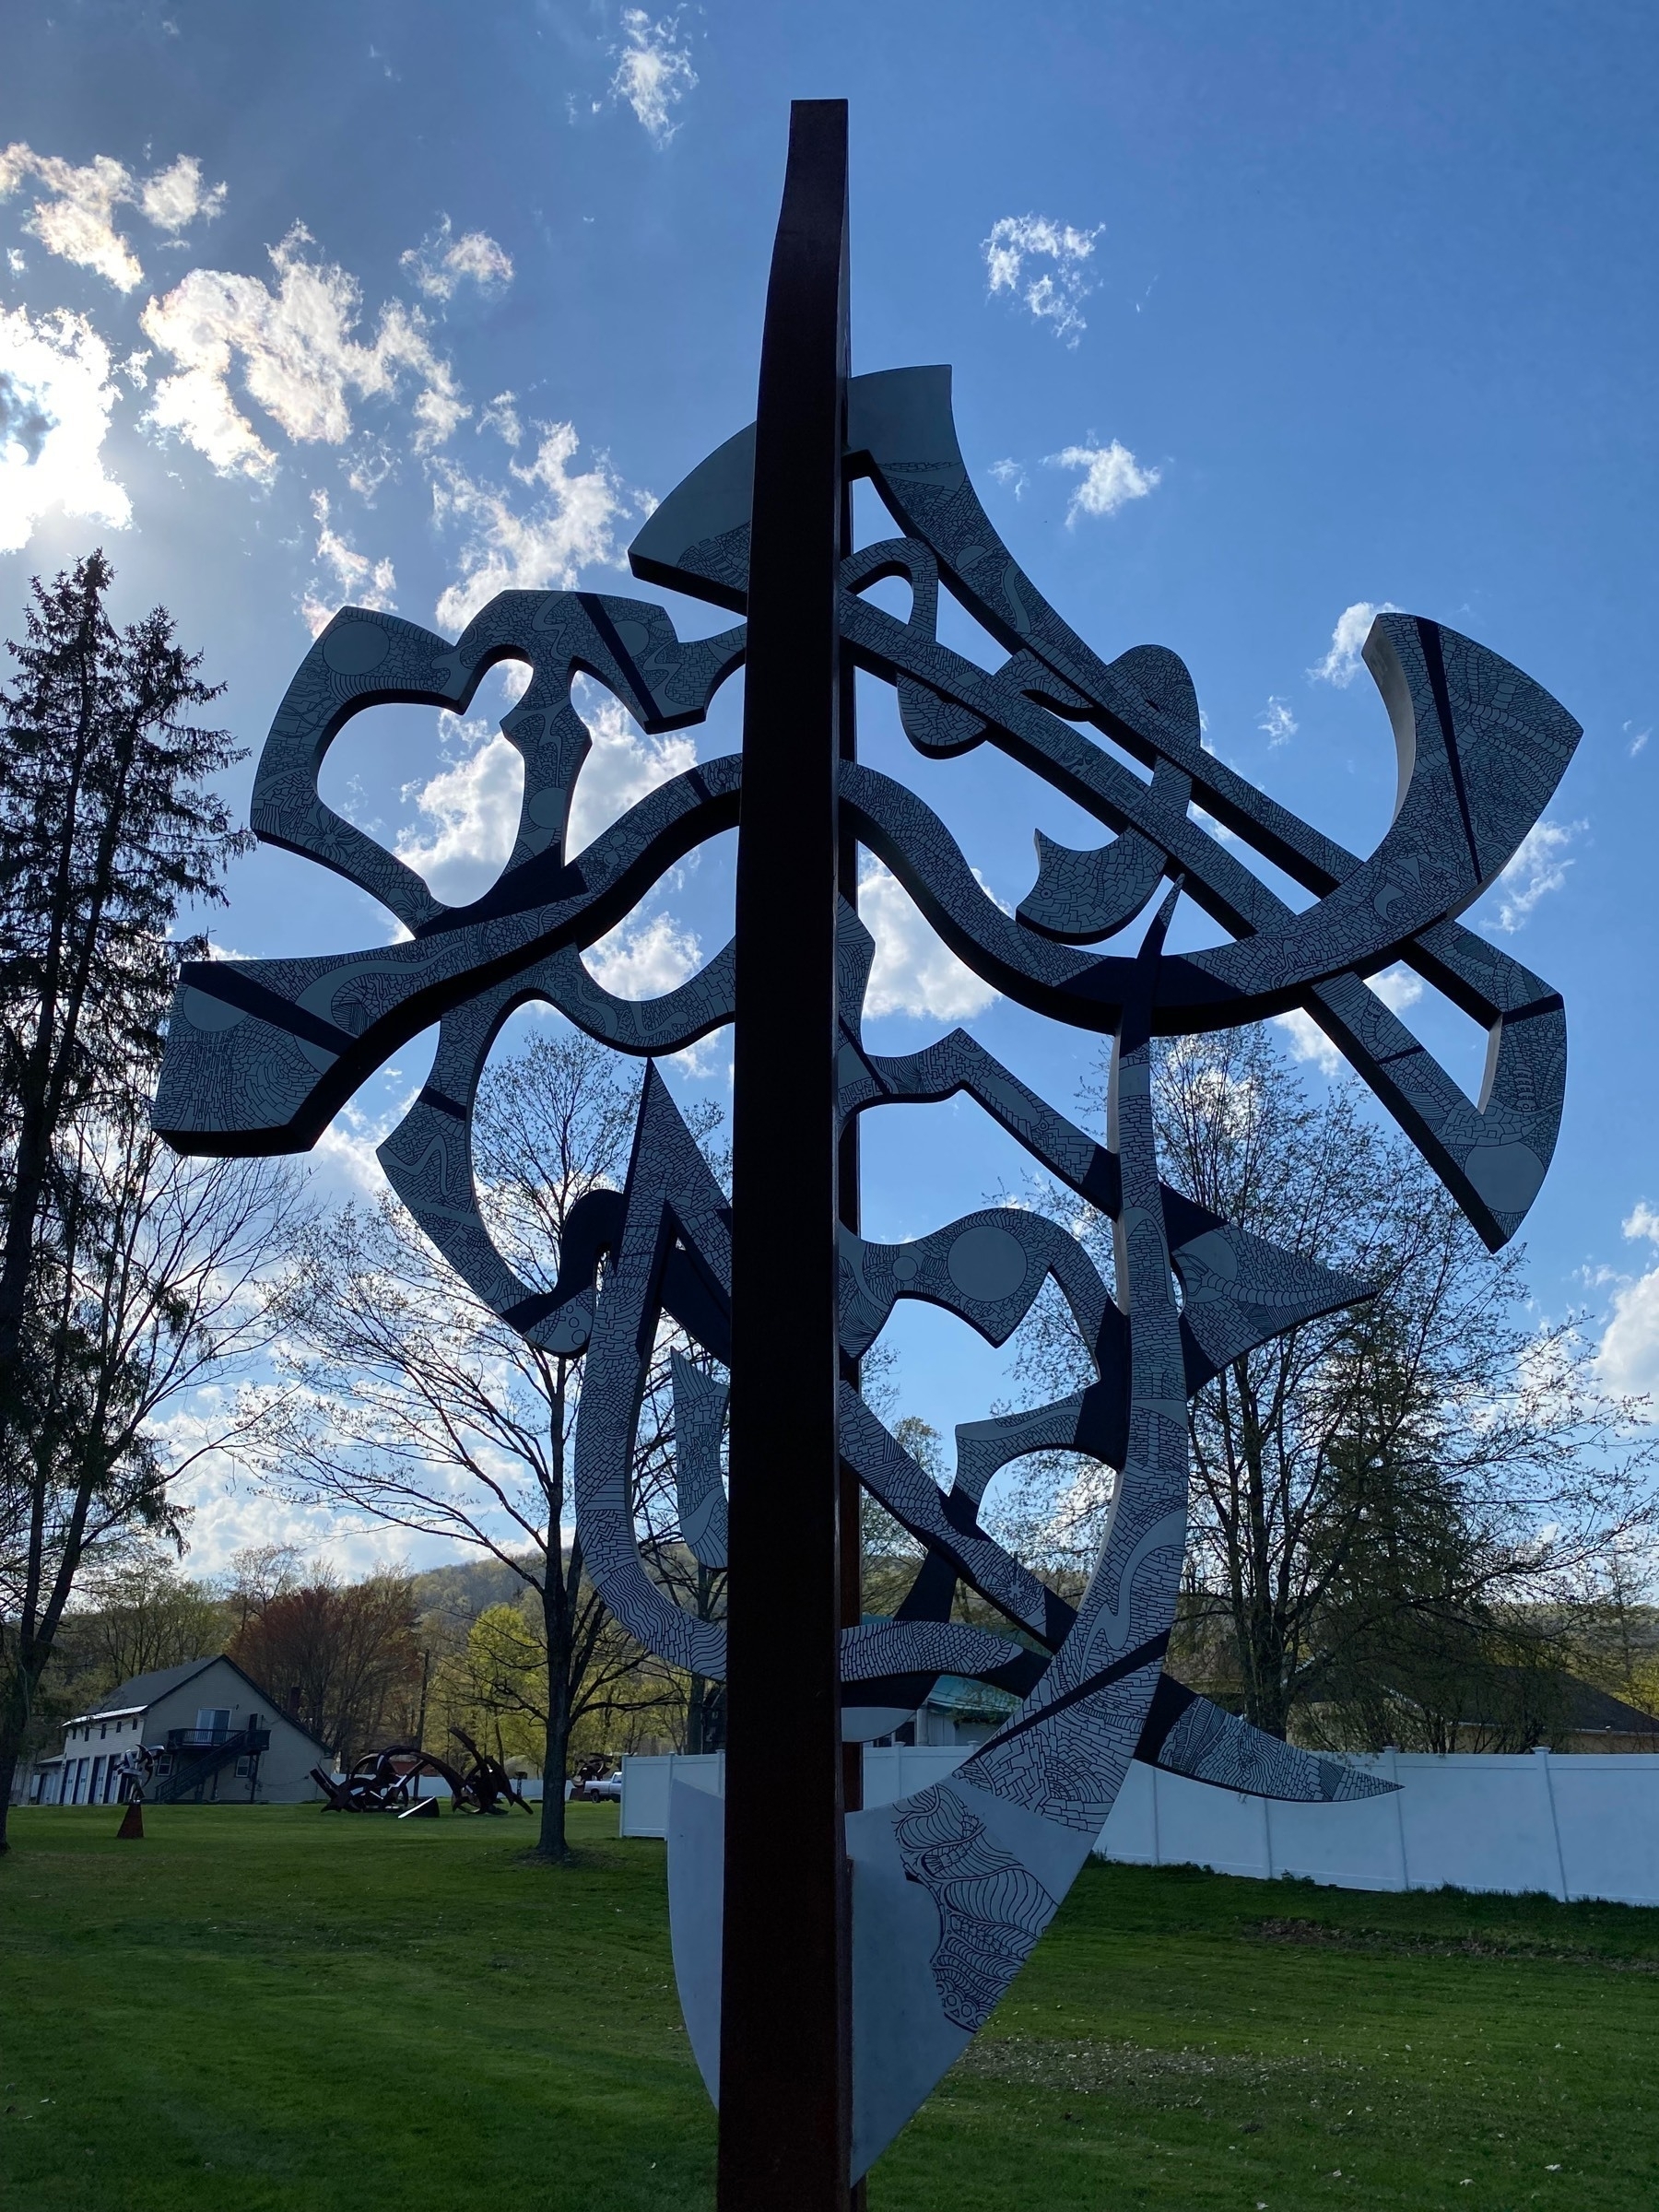 A metal sculpture against a blue sky with the sun behind clouds.